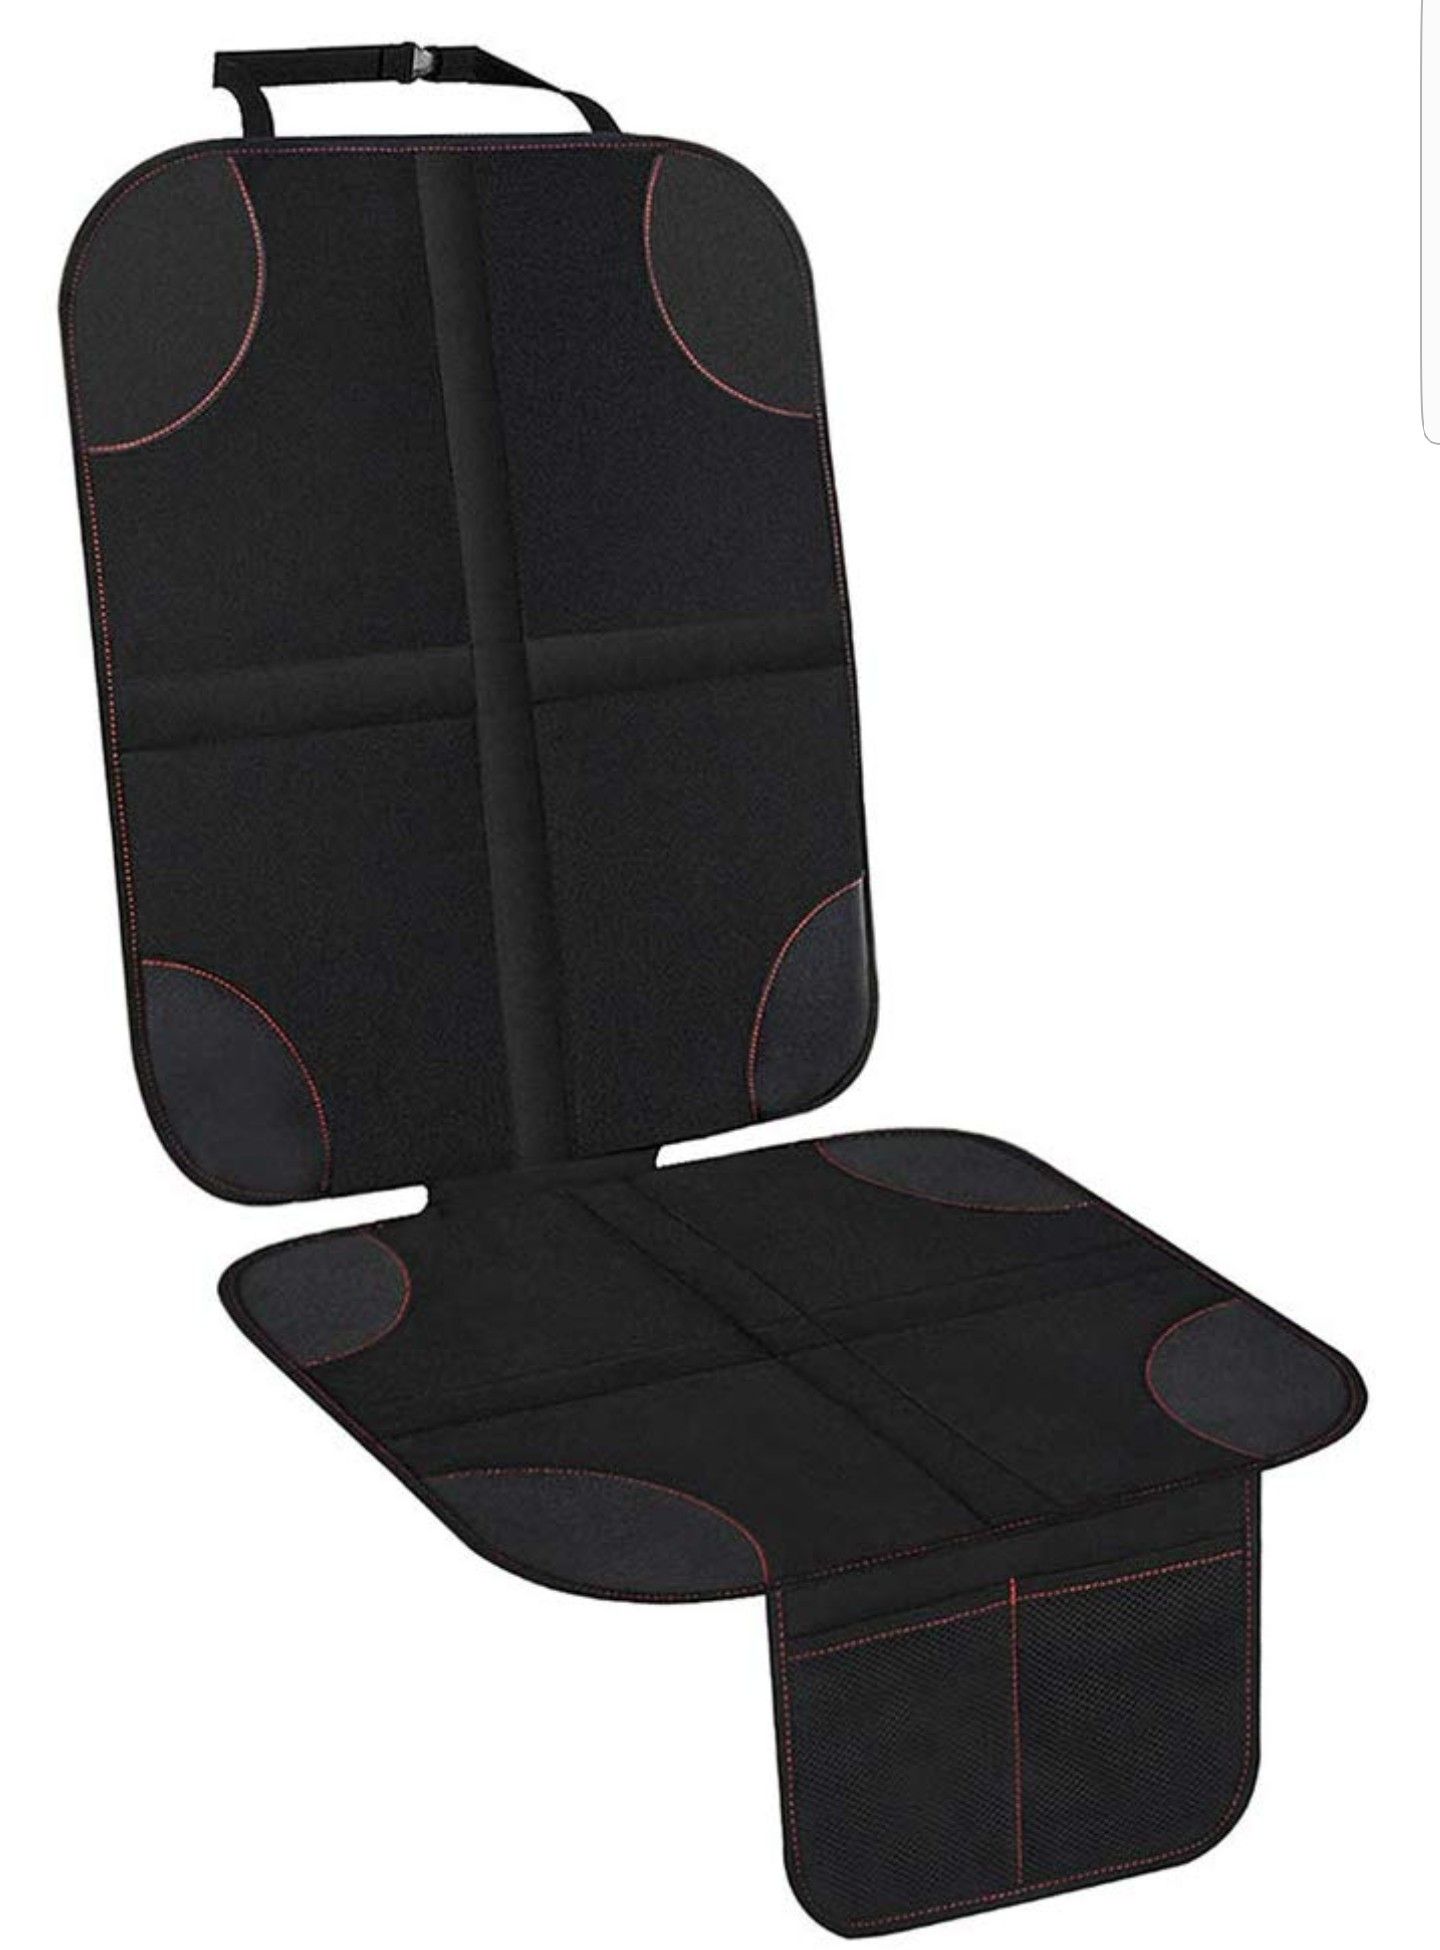 SEAT PROTECTOR FOR UNDER CHILD CAR SEAT...NEW IN PACKAGE